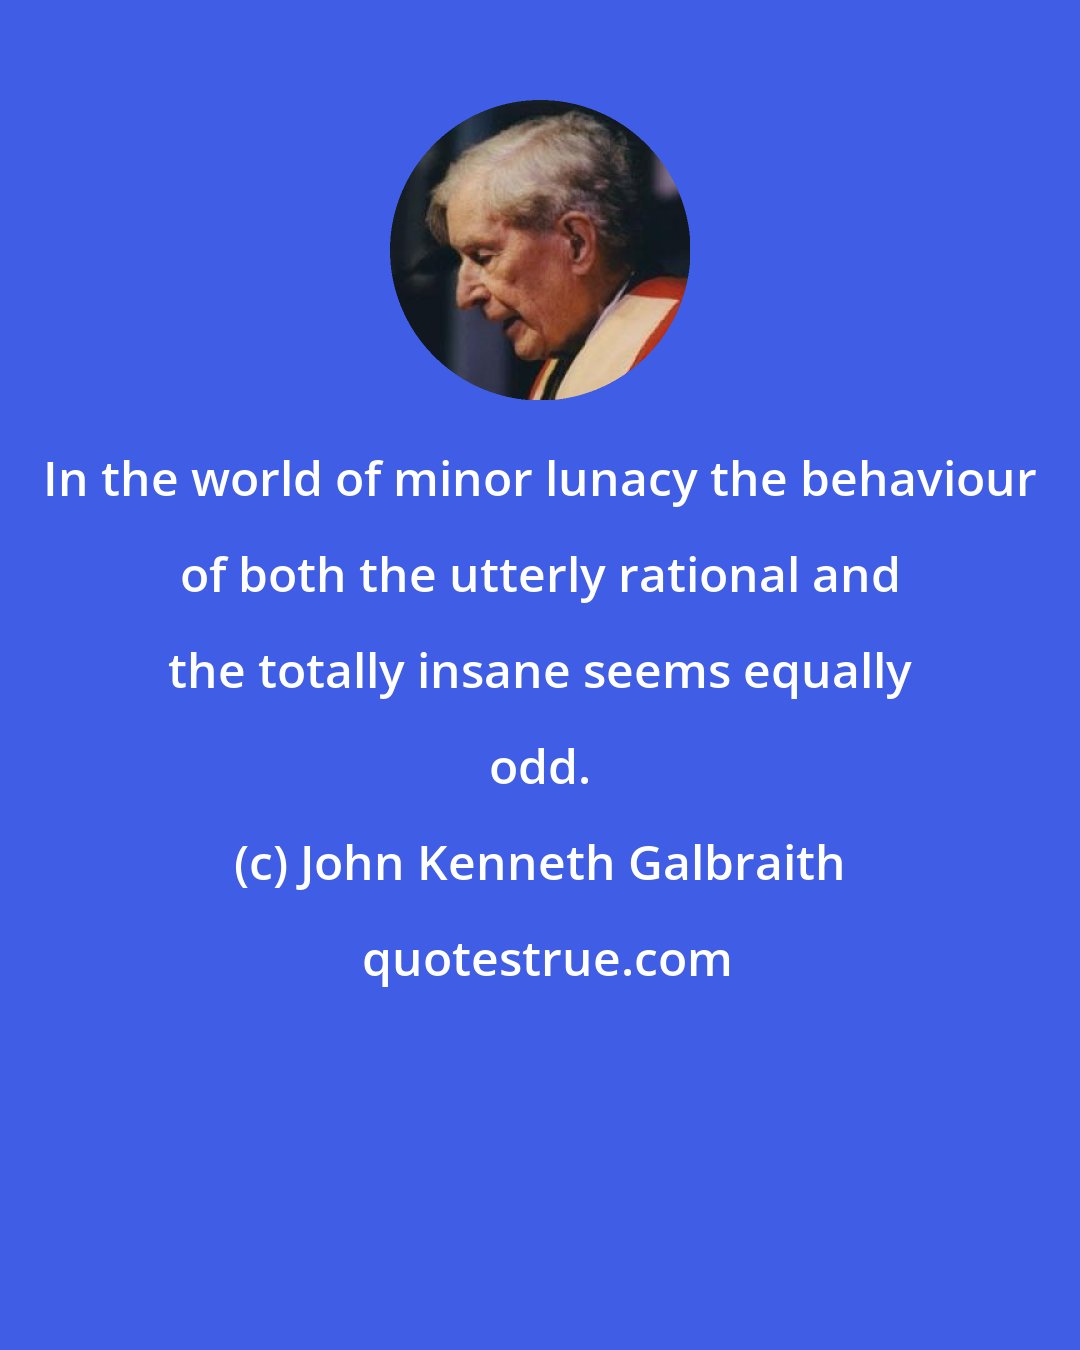 John Kenneth Galbraith: In the world of minor lunacy the behaviour of both the utterly rational and the totally insane seems equally odd.